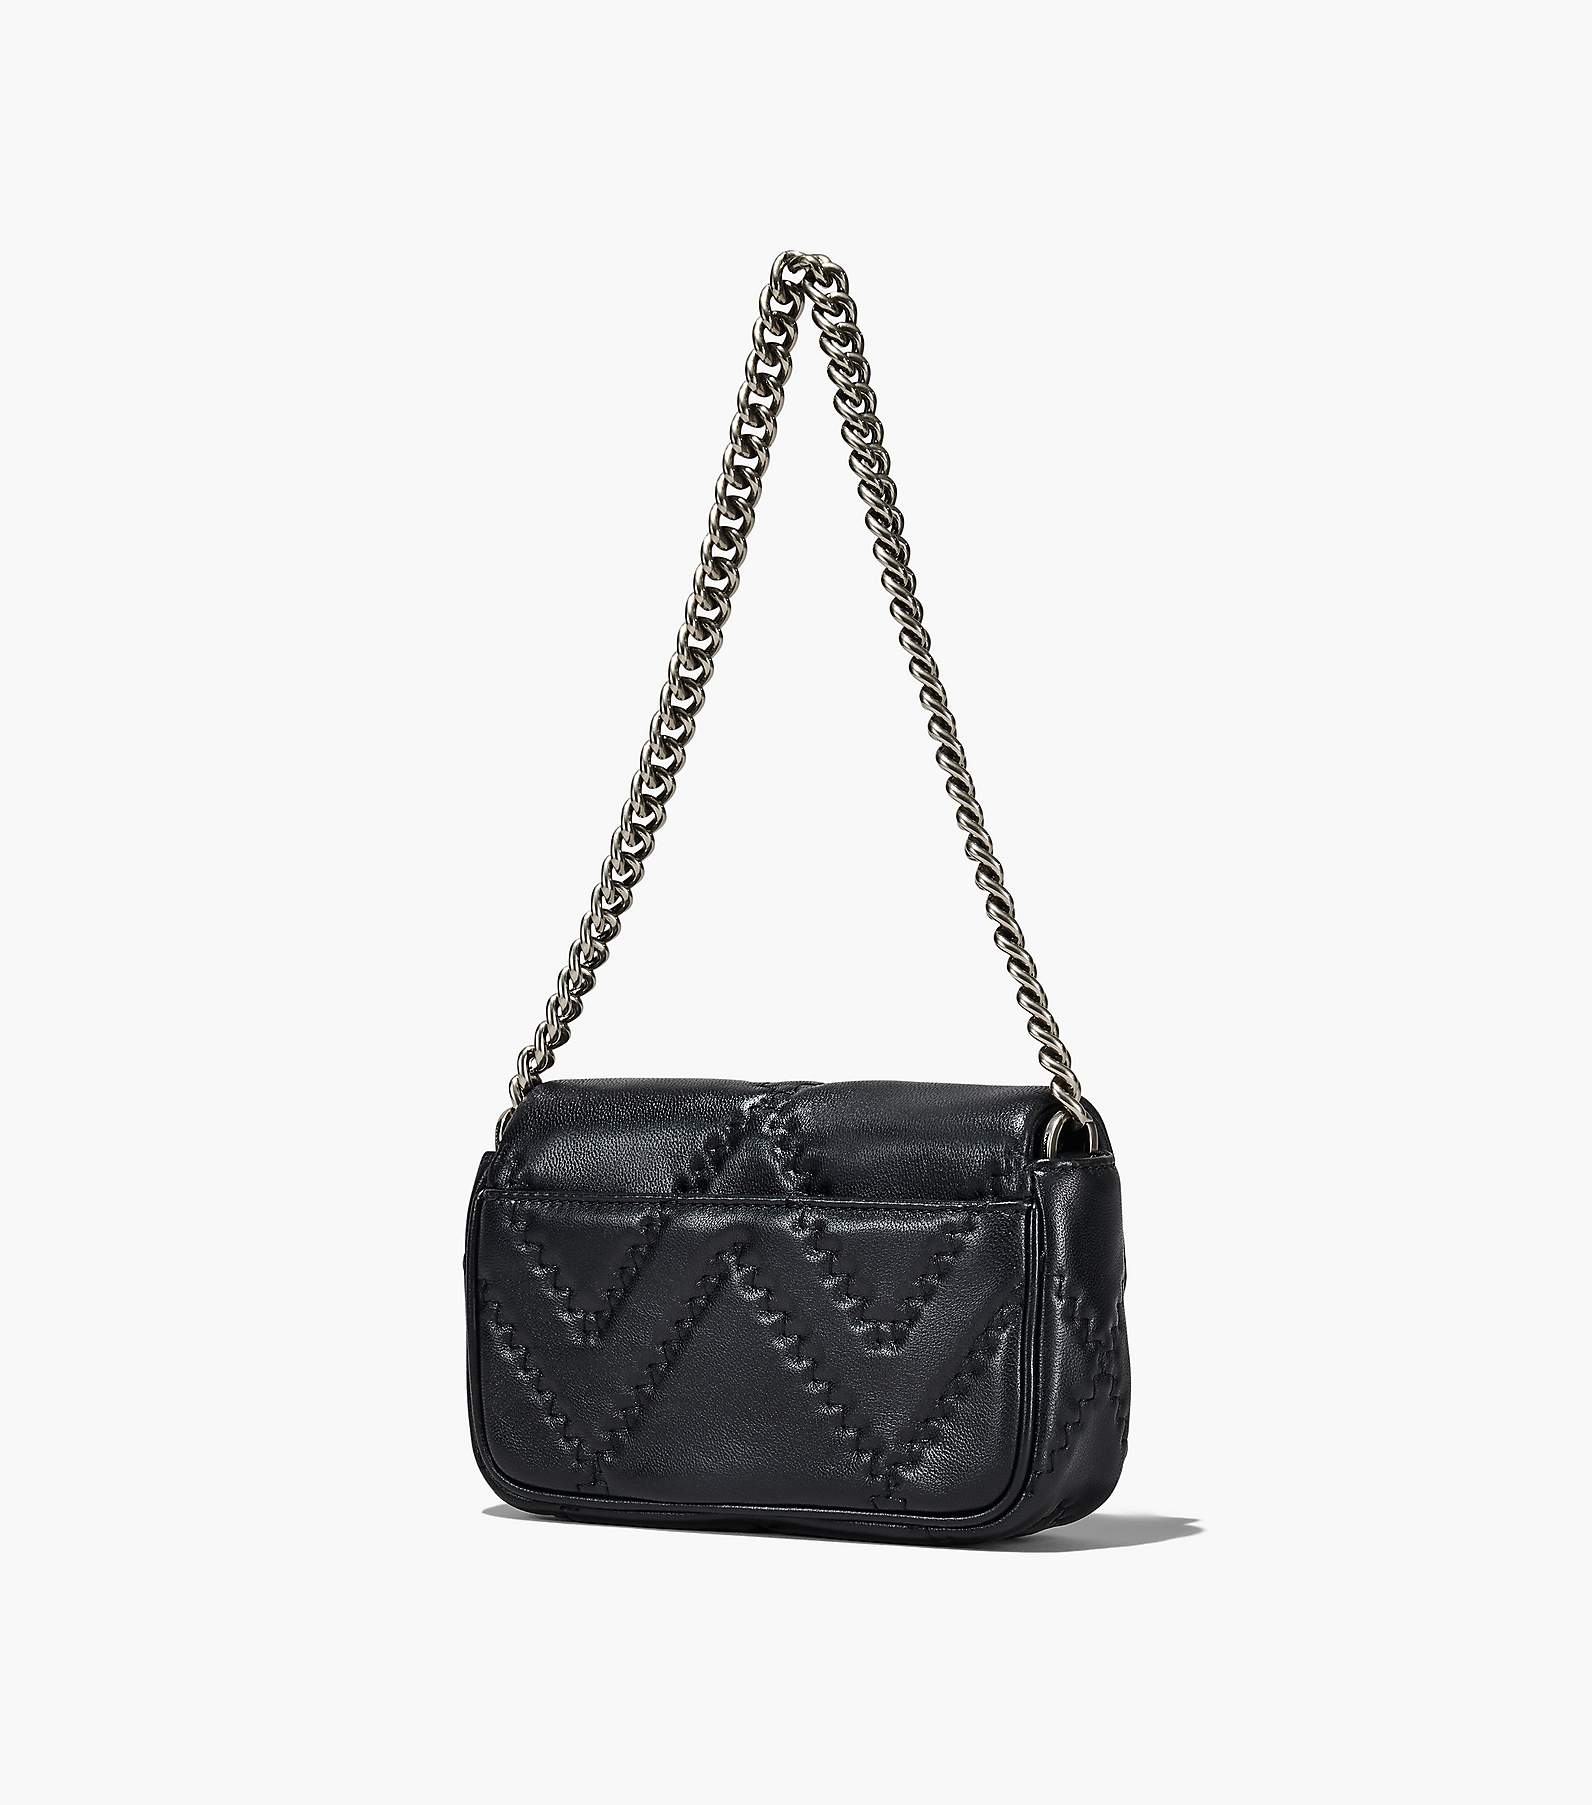 MARC JACOBS The Mini Quilted Leather J Marc Shoulder Bag